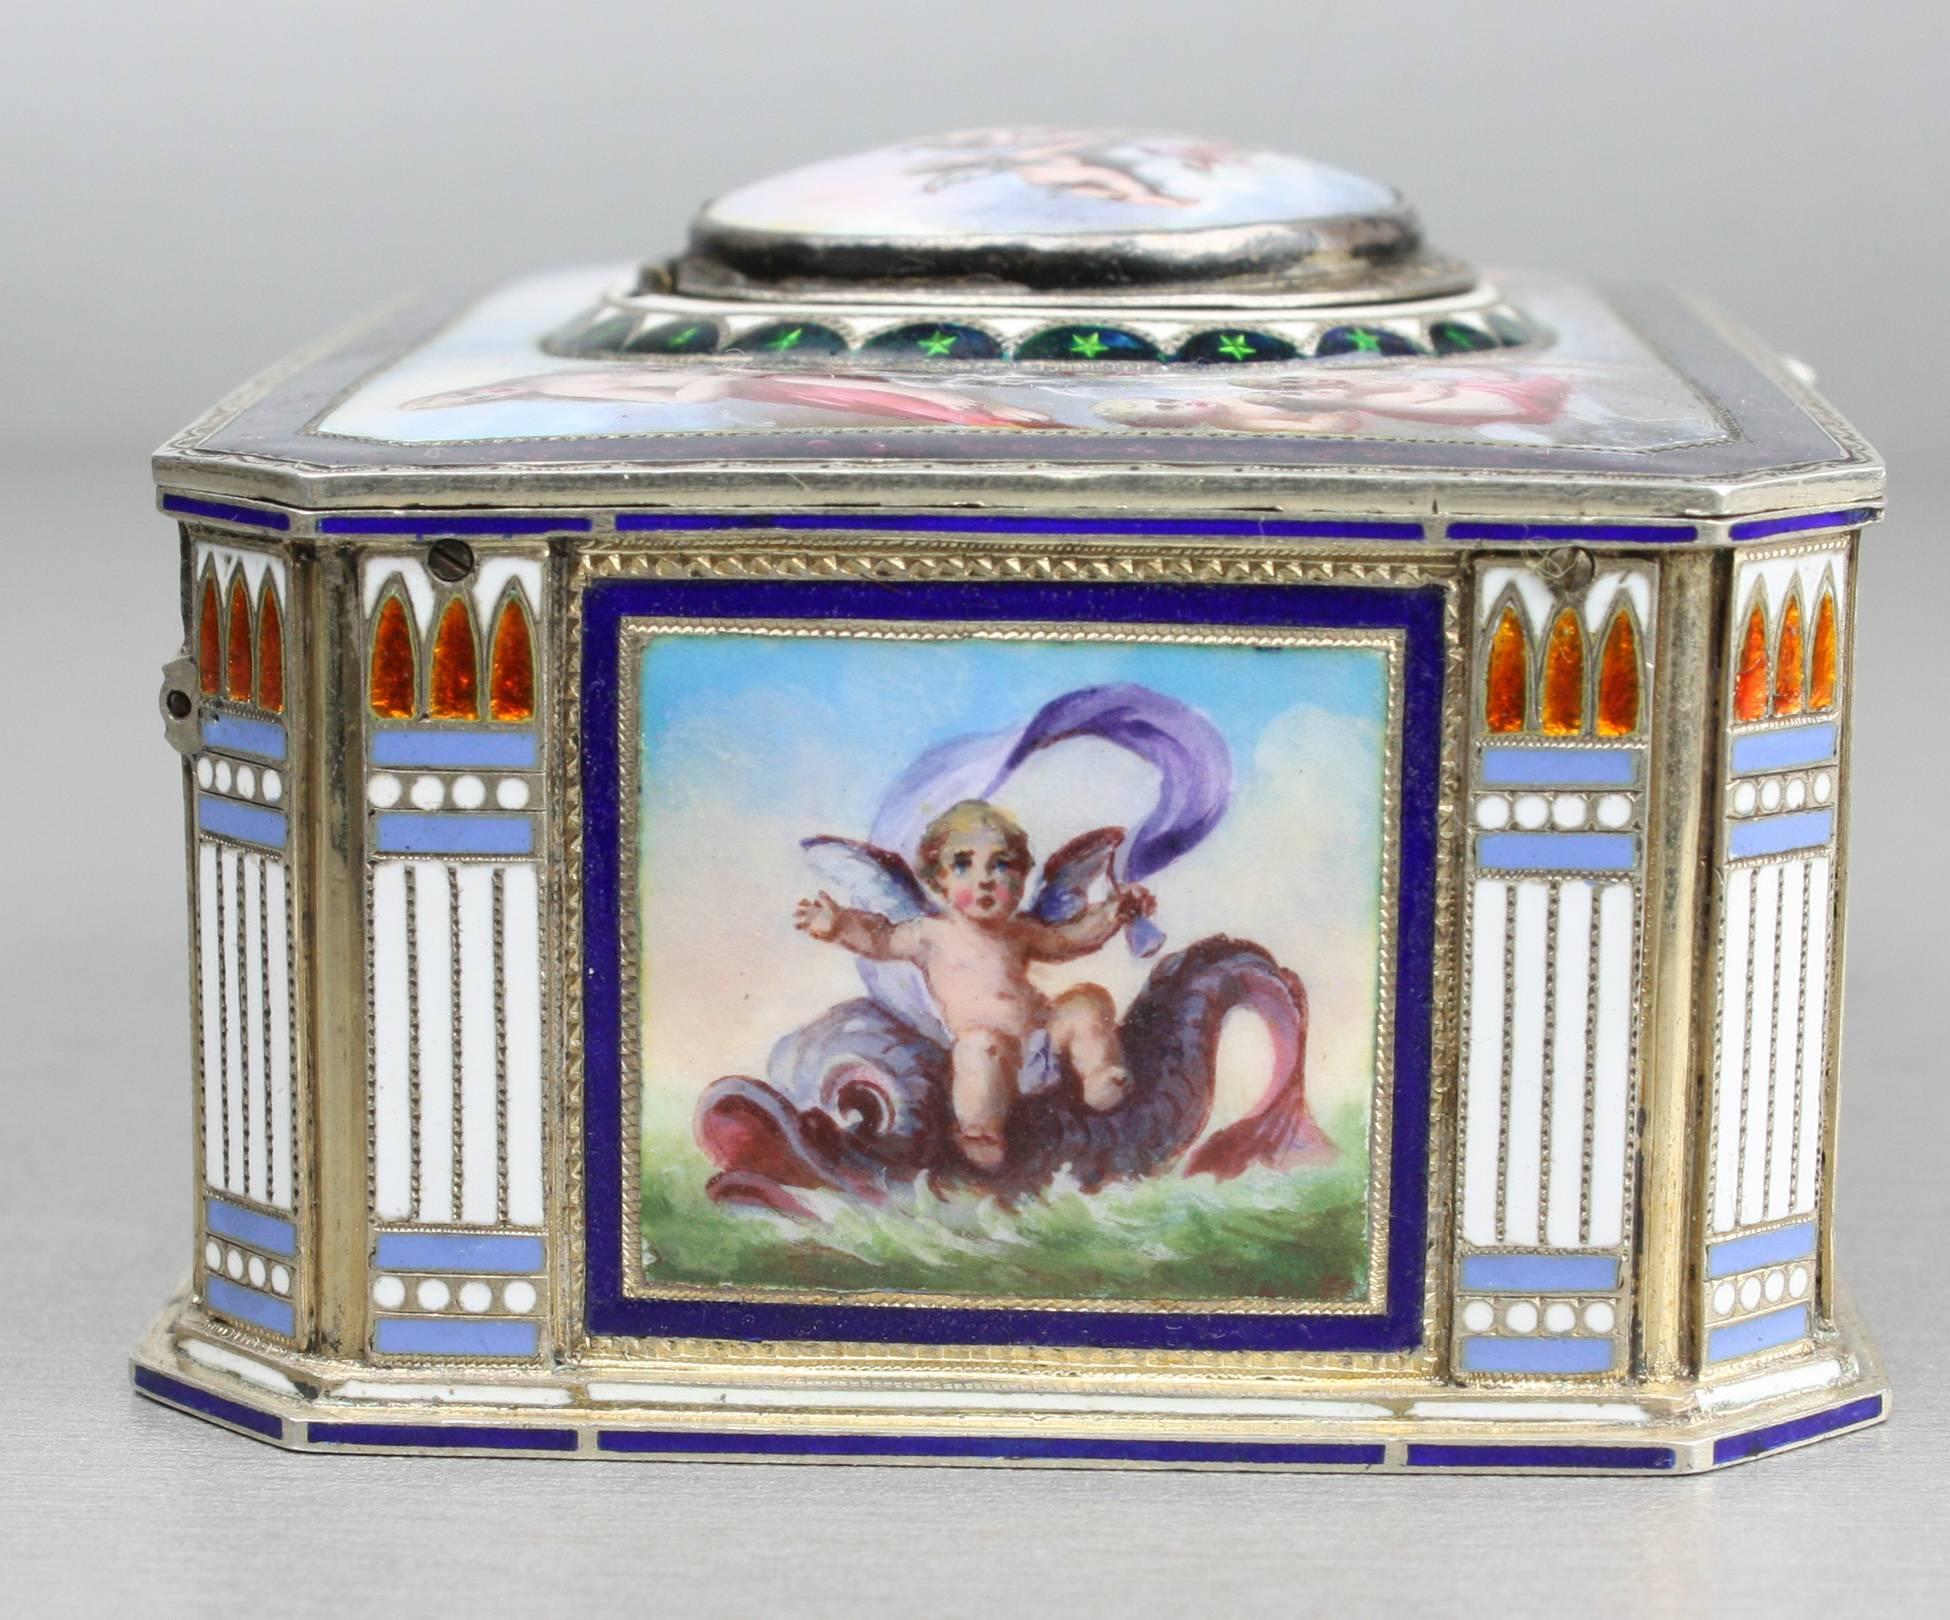 Early 20th Century Vintage Silver and Full Pictorial Enamel Singing Bird Box by Karl Griesbaum